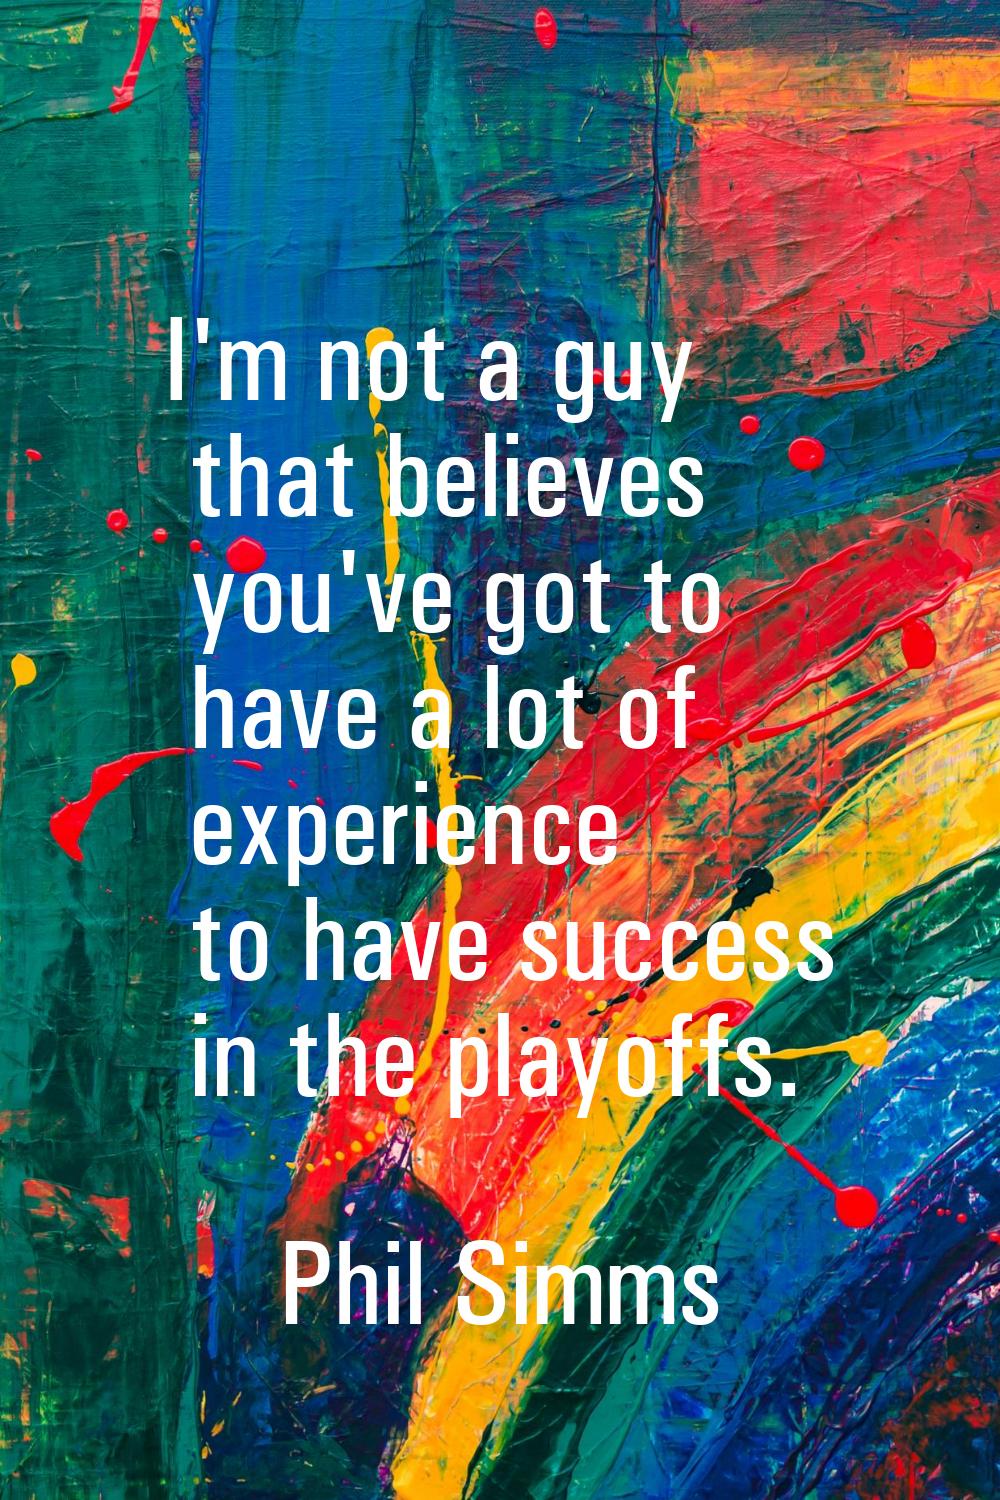 I'm not a guy that believes you've got to have a lot of experience to have success in the playoffs.